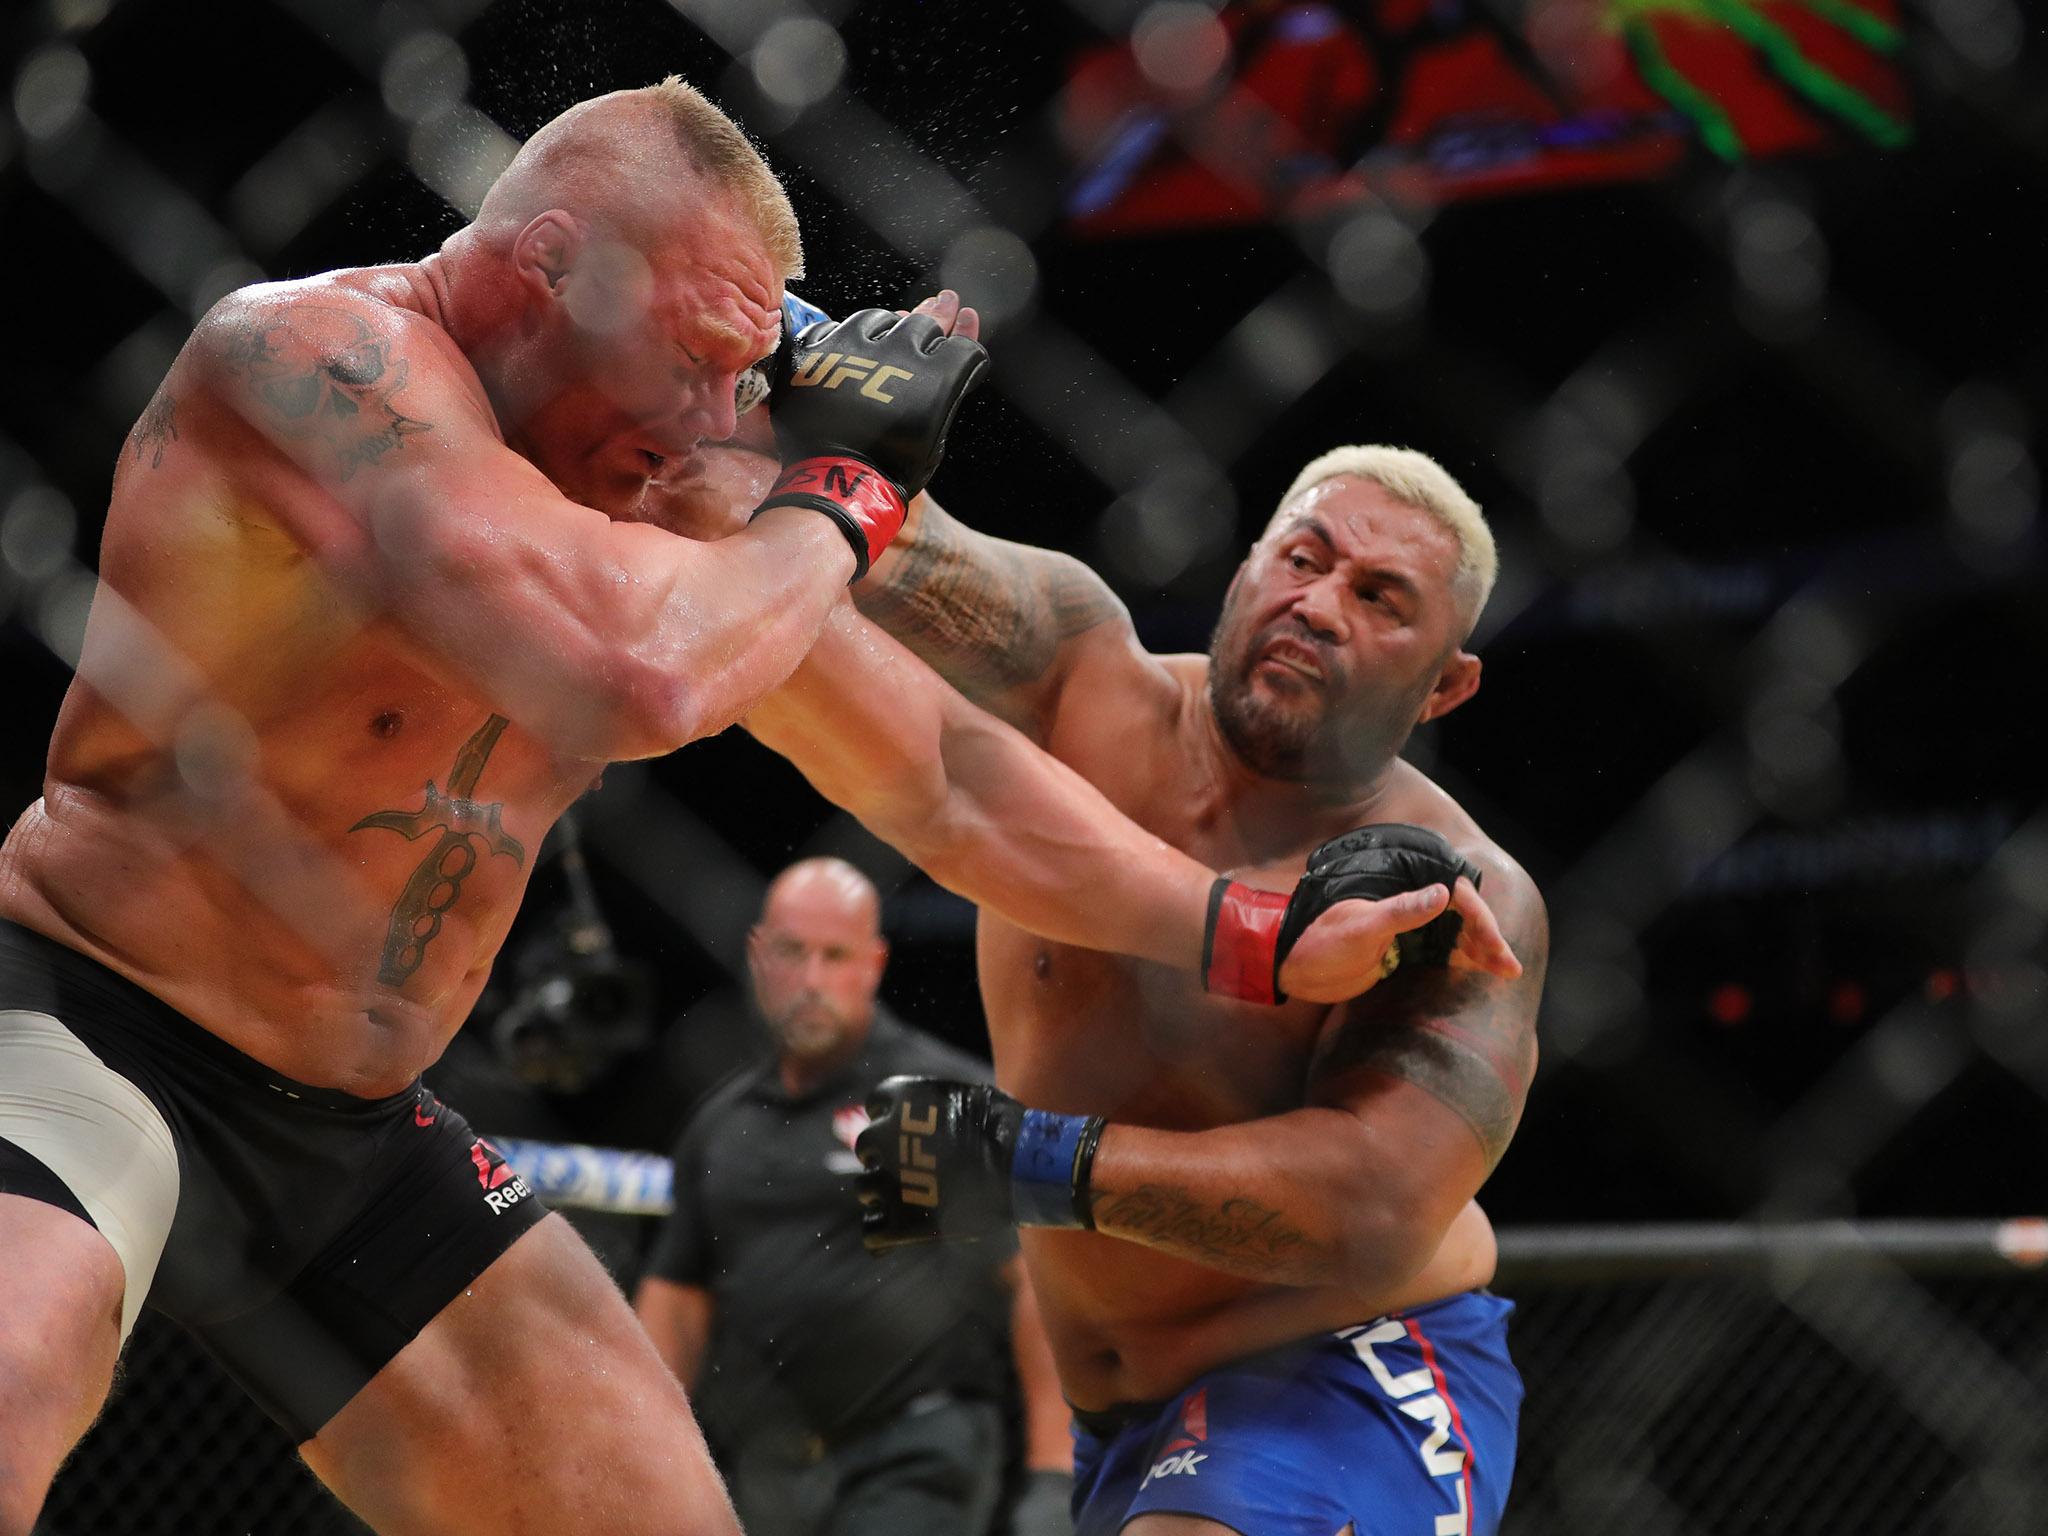 Hunt (r) lost the UFC 200 fight by unanimous decision